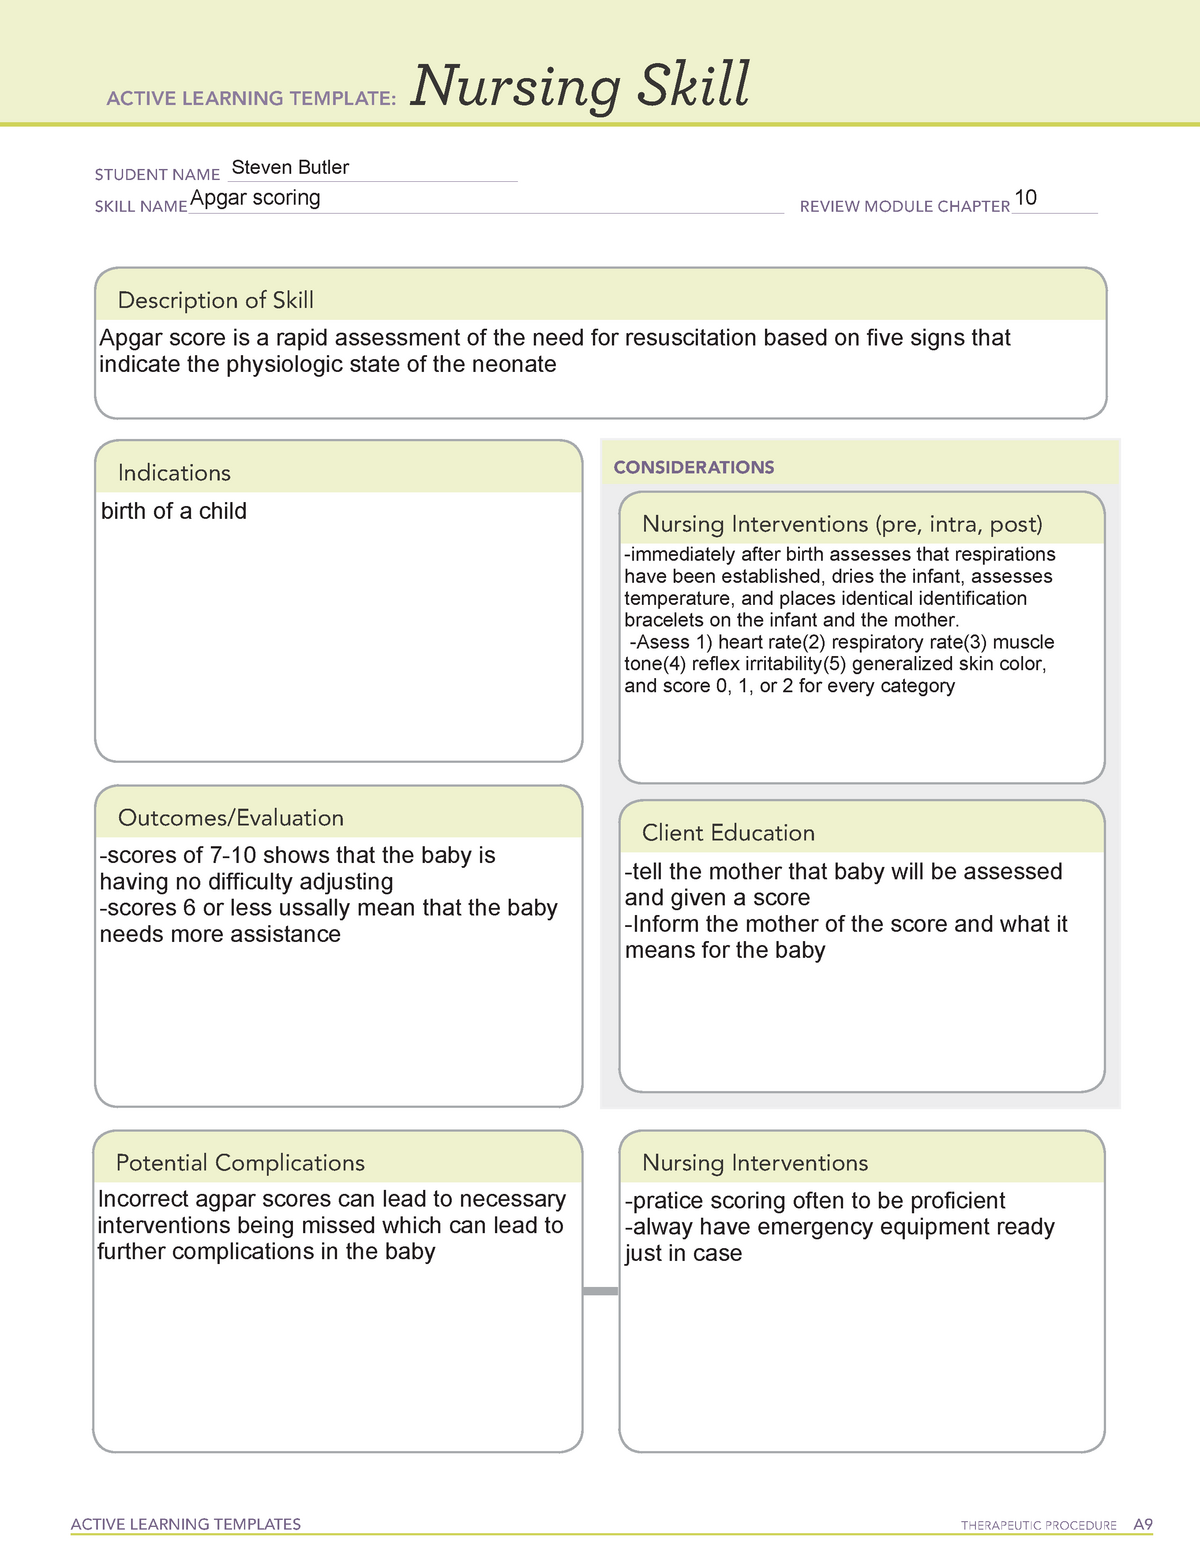 Apgar scoring of a new born - ACTIVE LEARNING TEMPLATES THERAPEUTIC ...